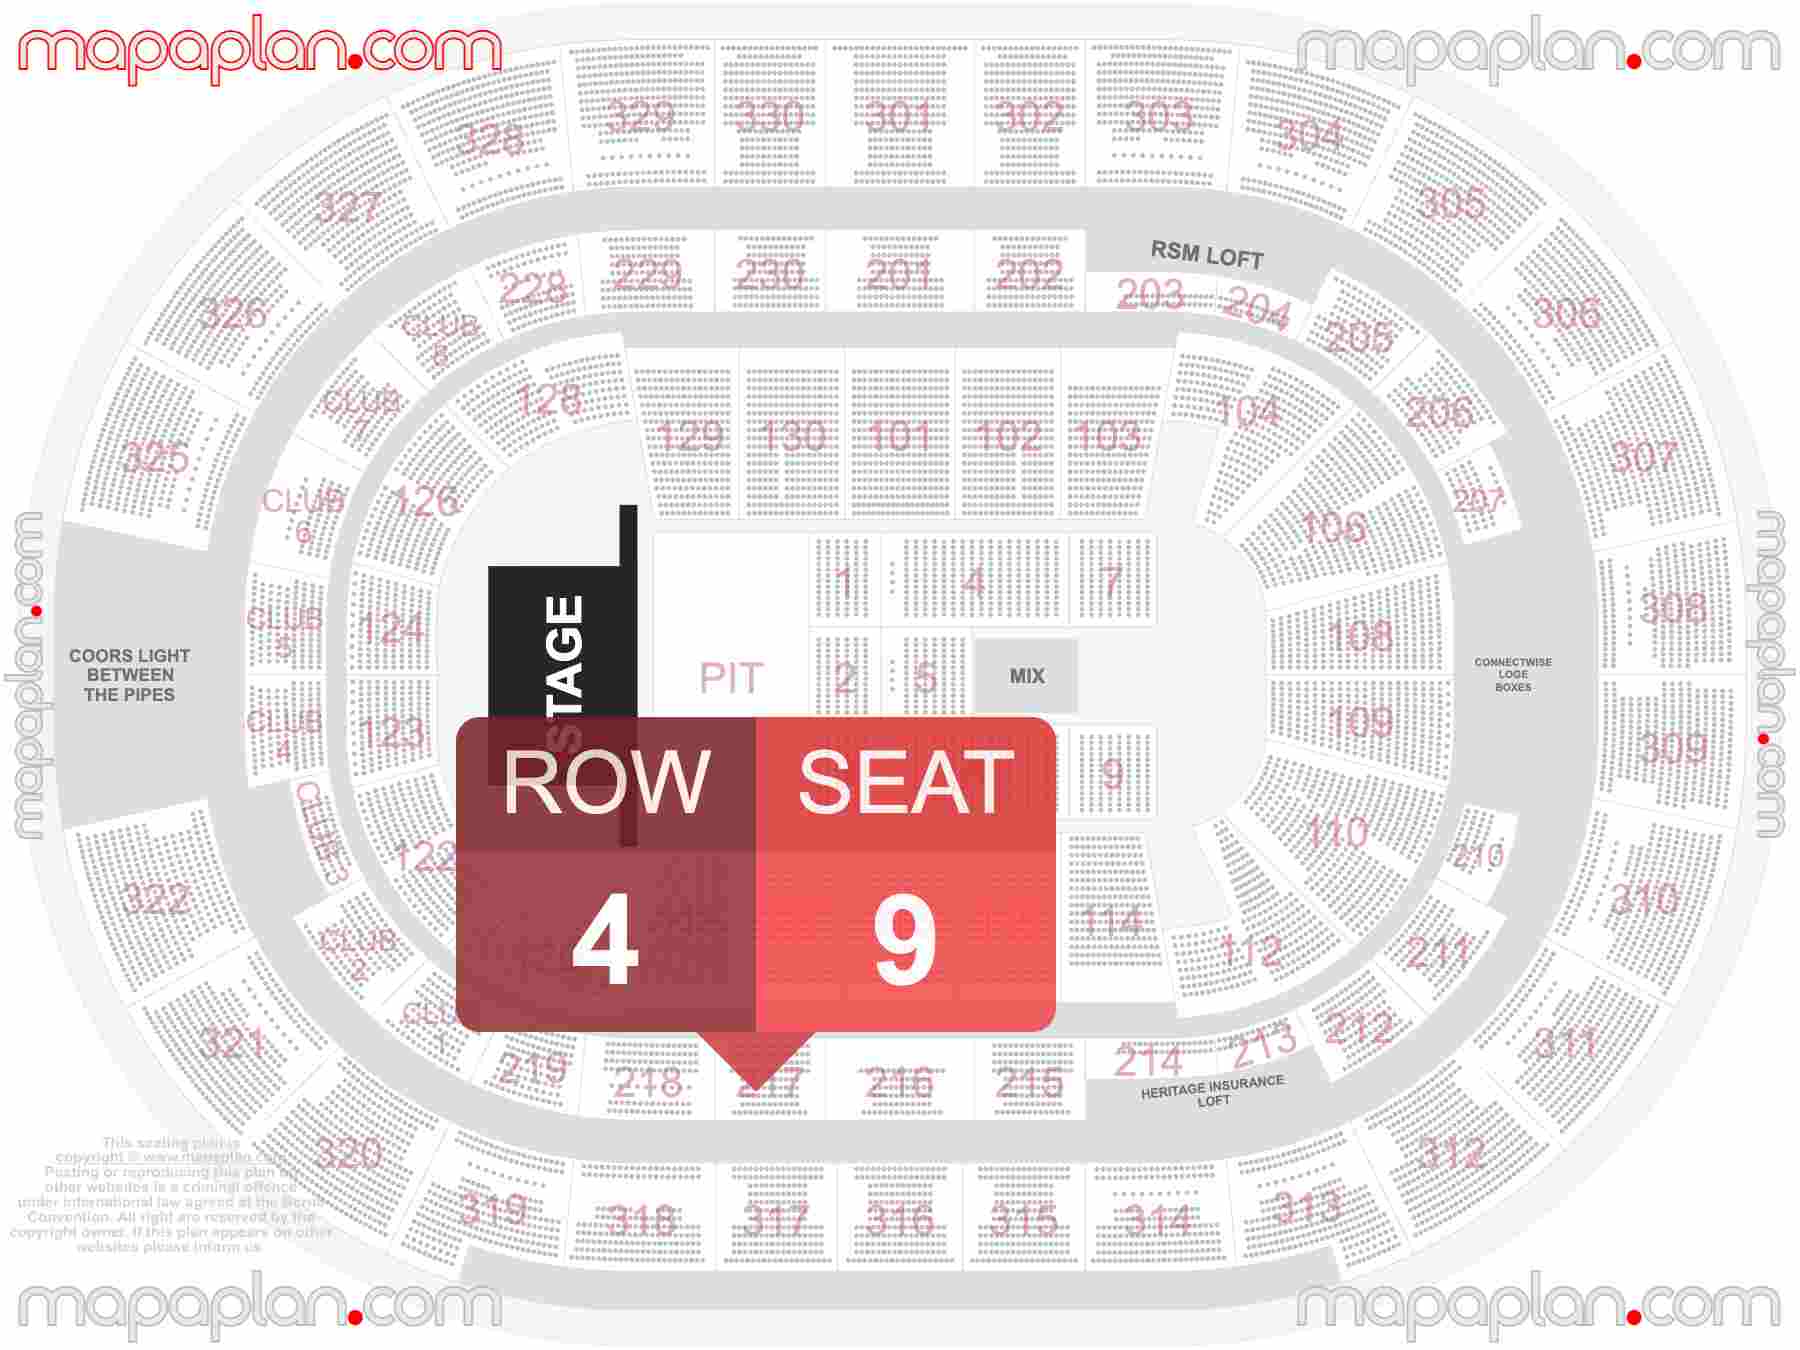 Tampa Amalie Arena seating chart Concert with PIT floor standing find best seats row numbering system plan showing how many seats per row - Individual 'find my seat' virtual locator